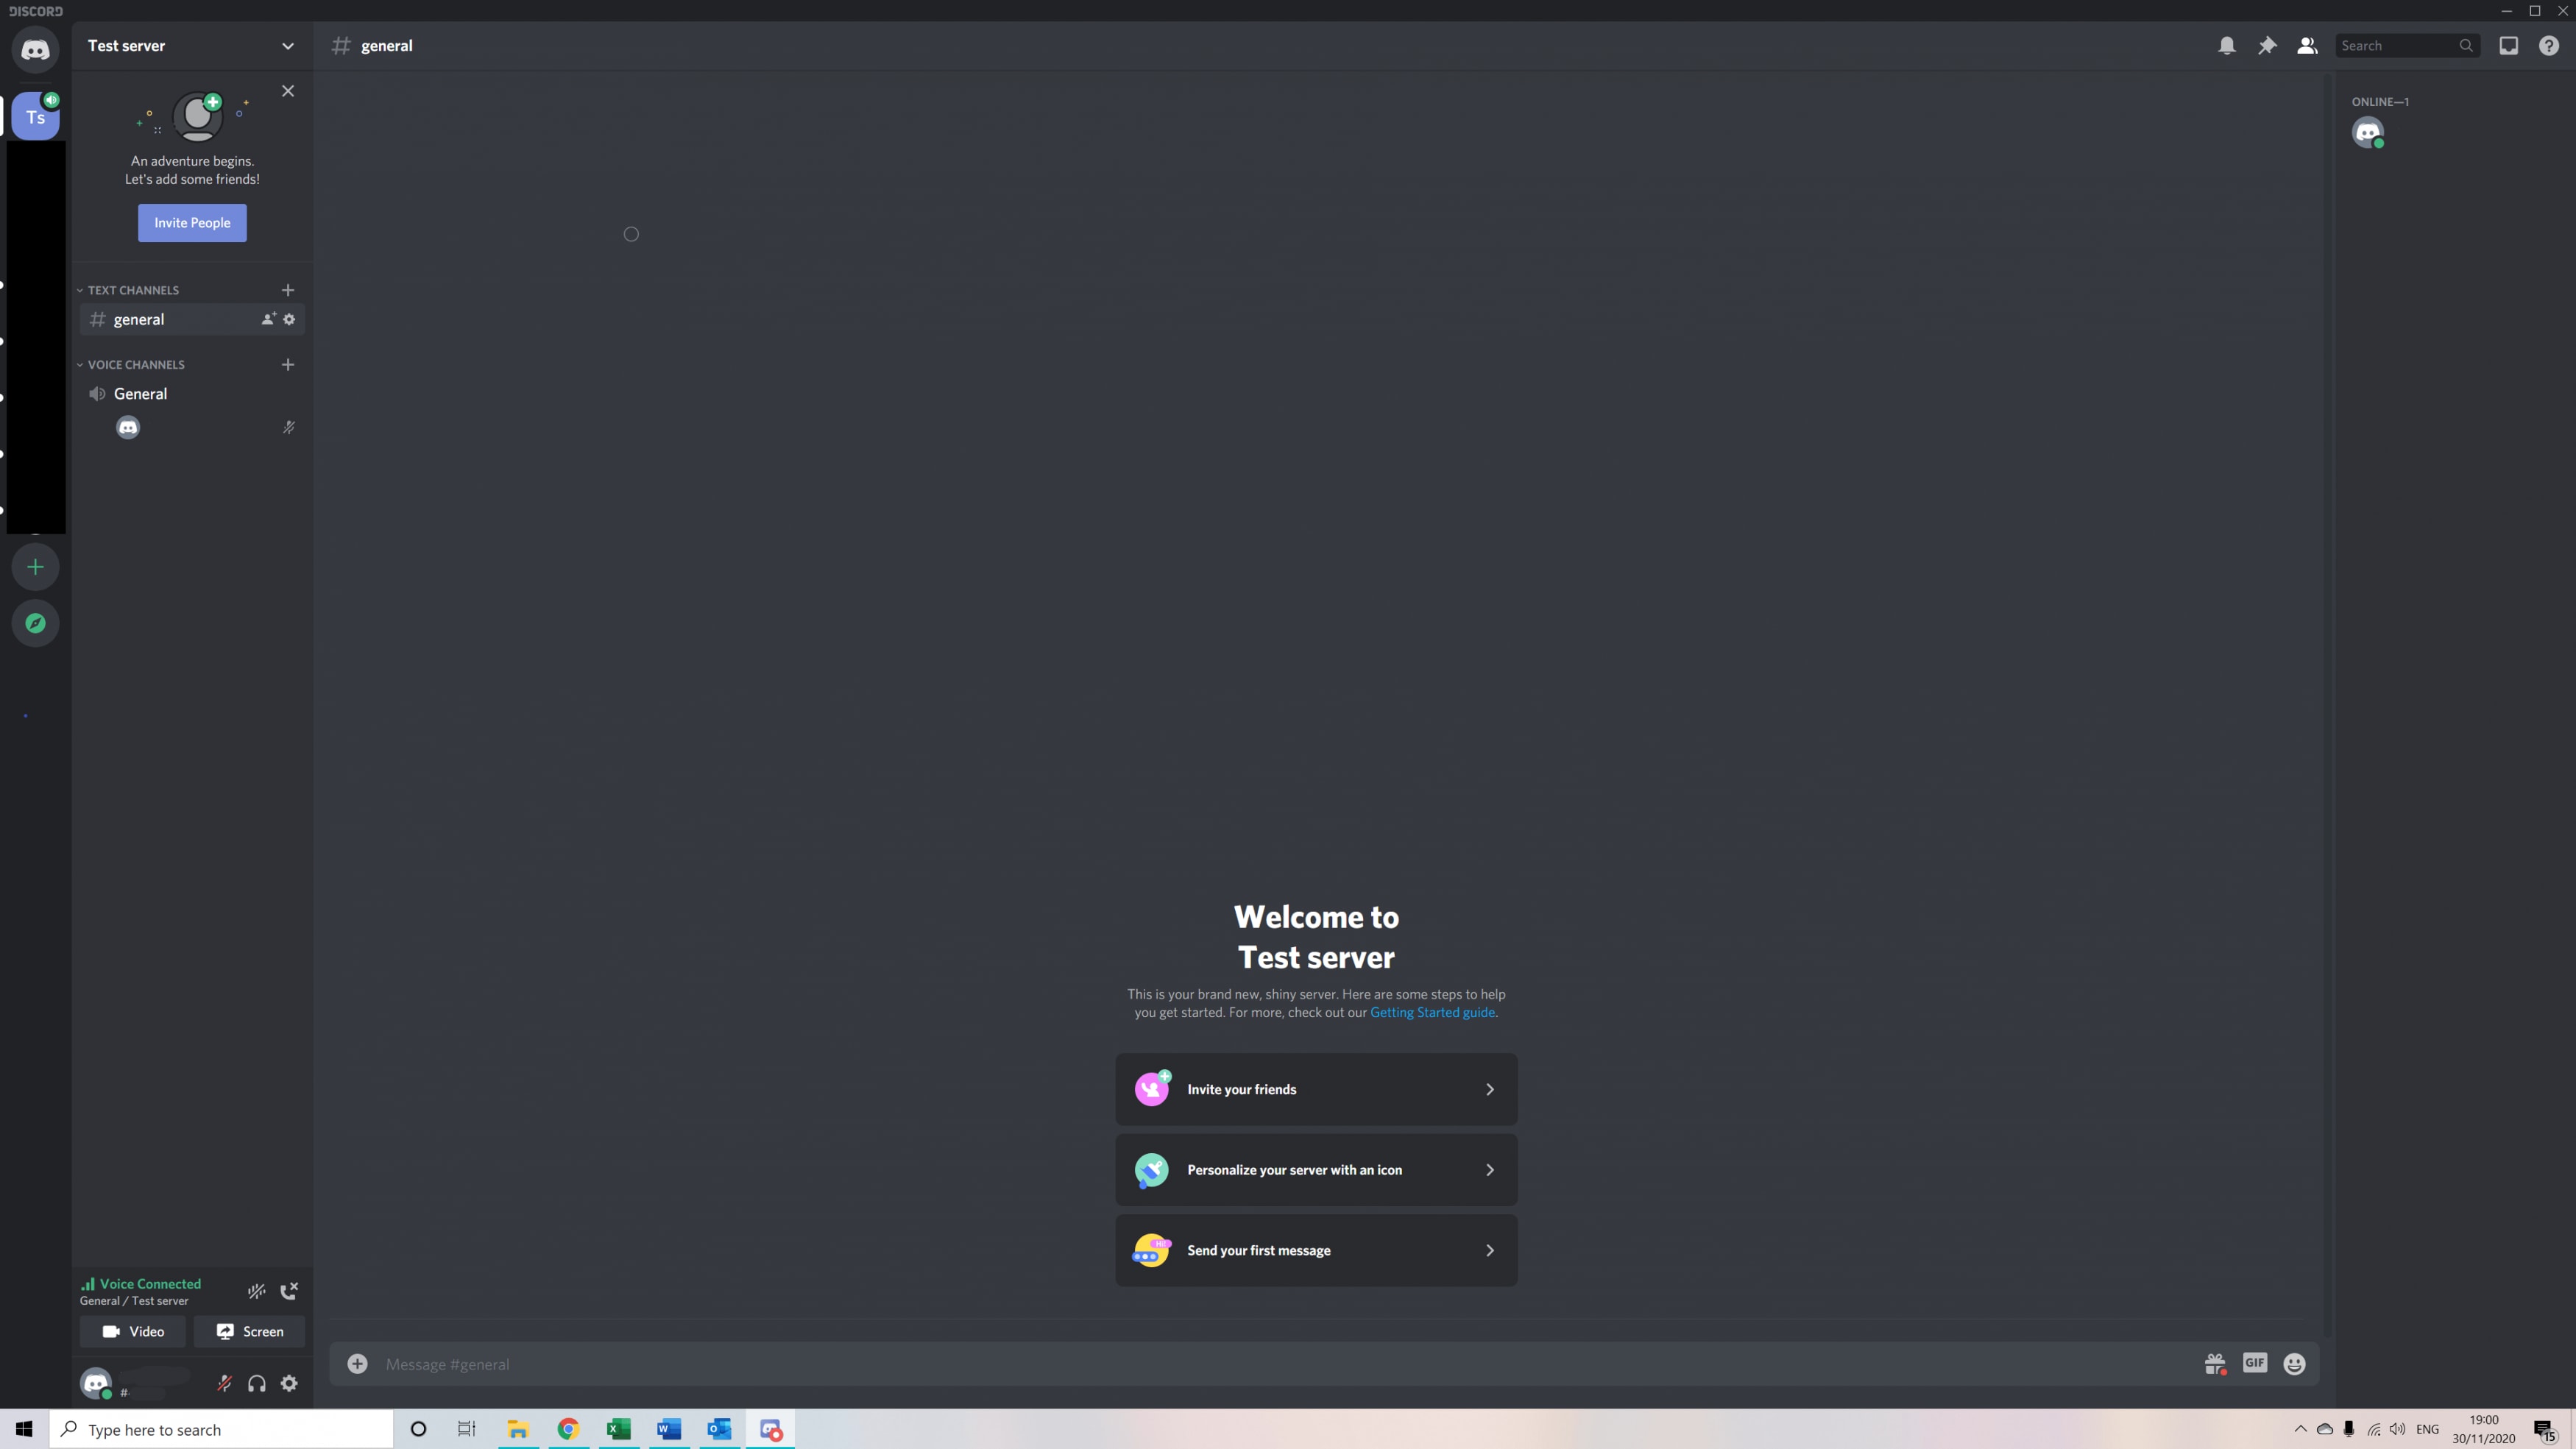  How to Share Screen on Discord?